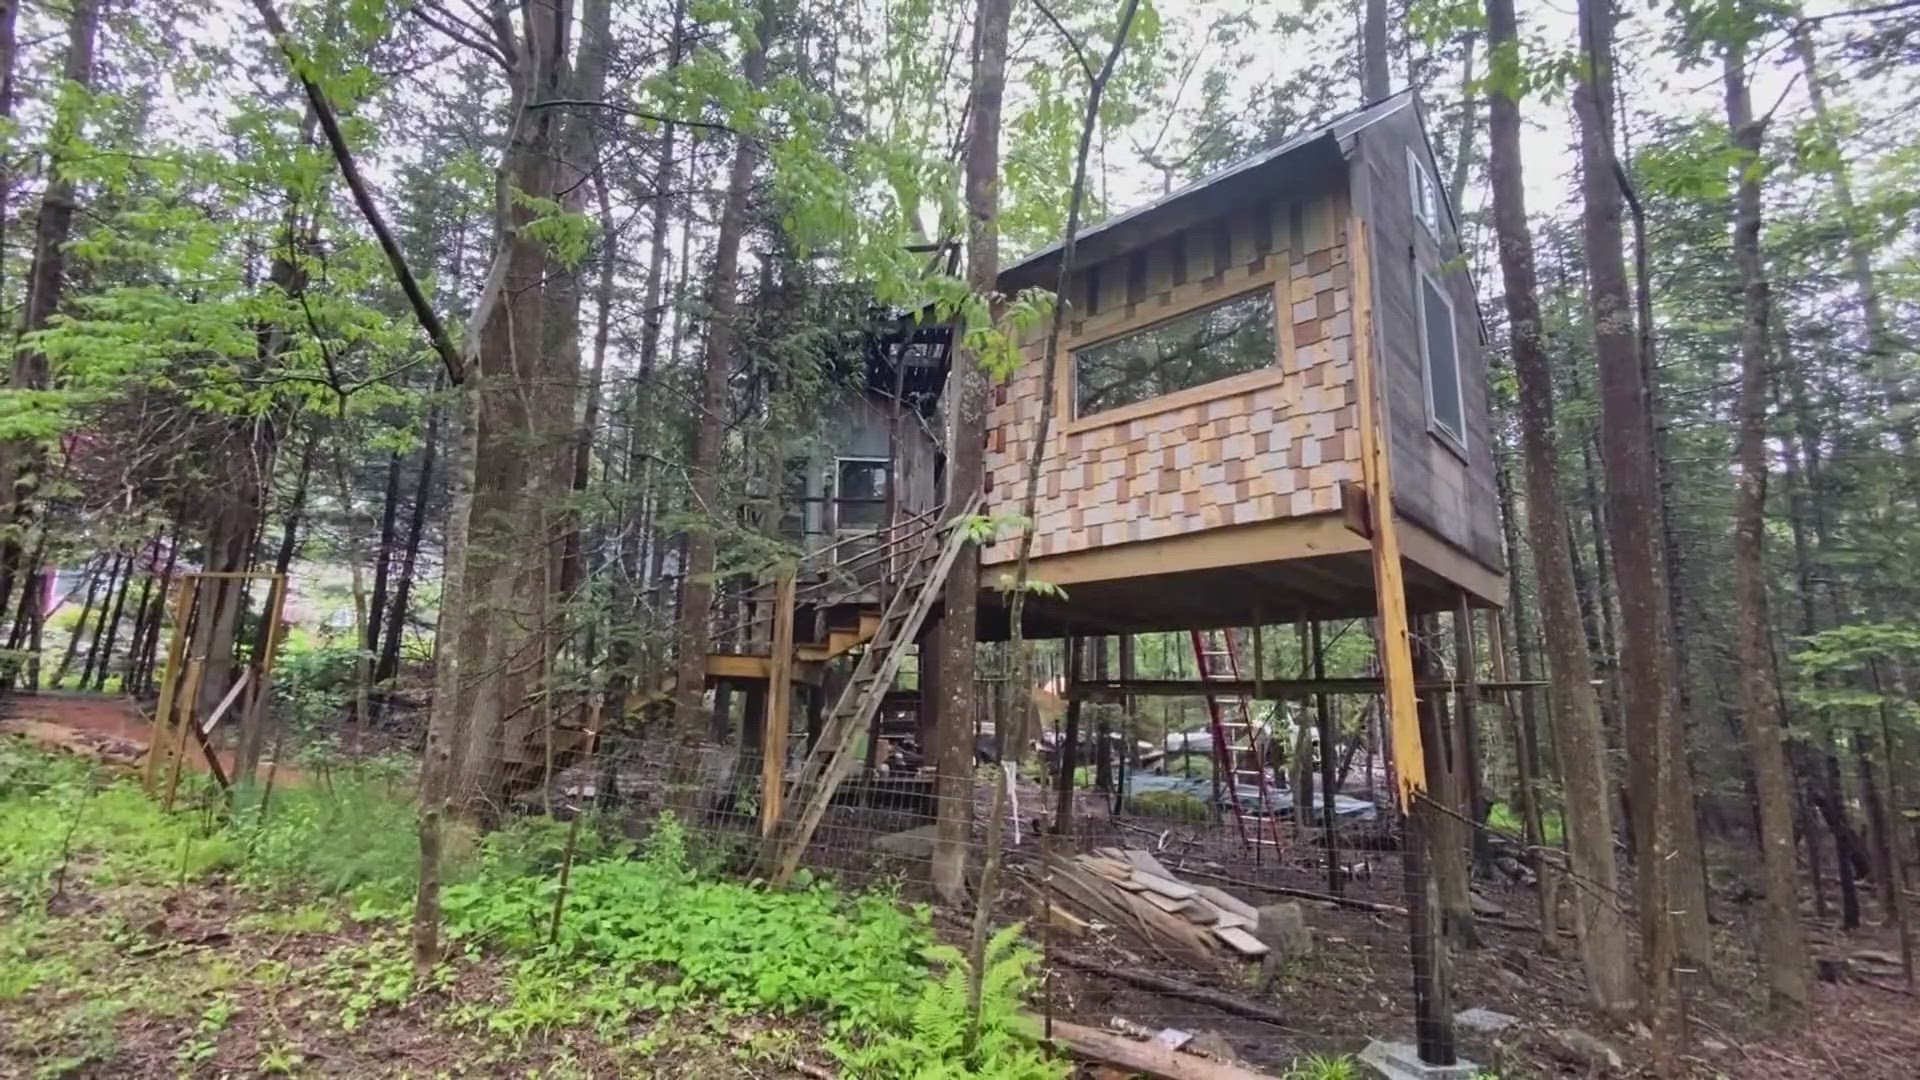 Southwest Harbor resident Bowen Swersey has built unique treehouses with railings made out of branches and one even built entirely out of salvaged materials.